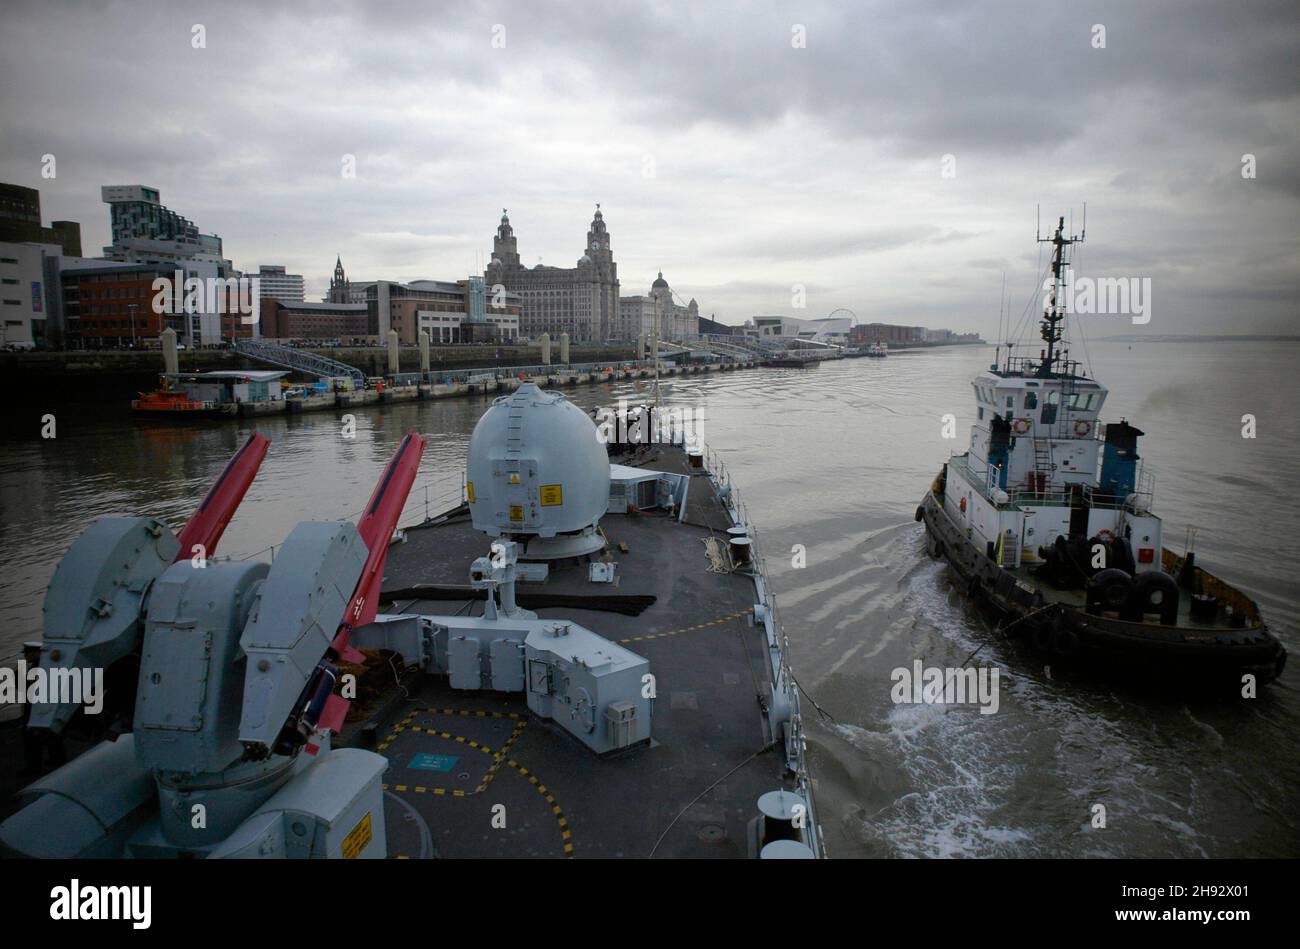 AJAXNETPHOTO. 29 FEB, 2012. LIVERPOOL, ENGLAND. - HMS LIVERPOOL. GLASGOW TO LIVERPOOL PASSAGE - TYPE 45 DESTROYER ENTERS MERSEY RIVER ON ROUTE TO CRUISE TERMINAL. PHOTO: JONATHAN EASTLAND/AJAX REF: R122902 2213 Stock Photo